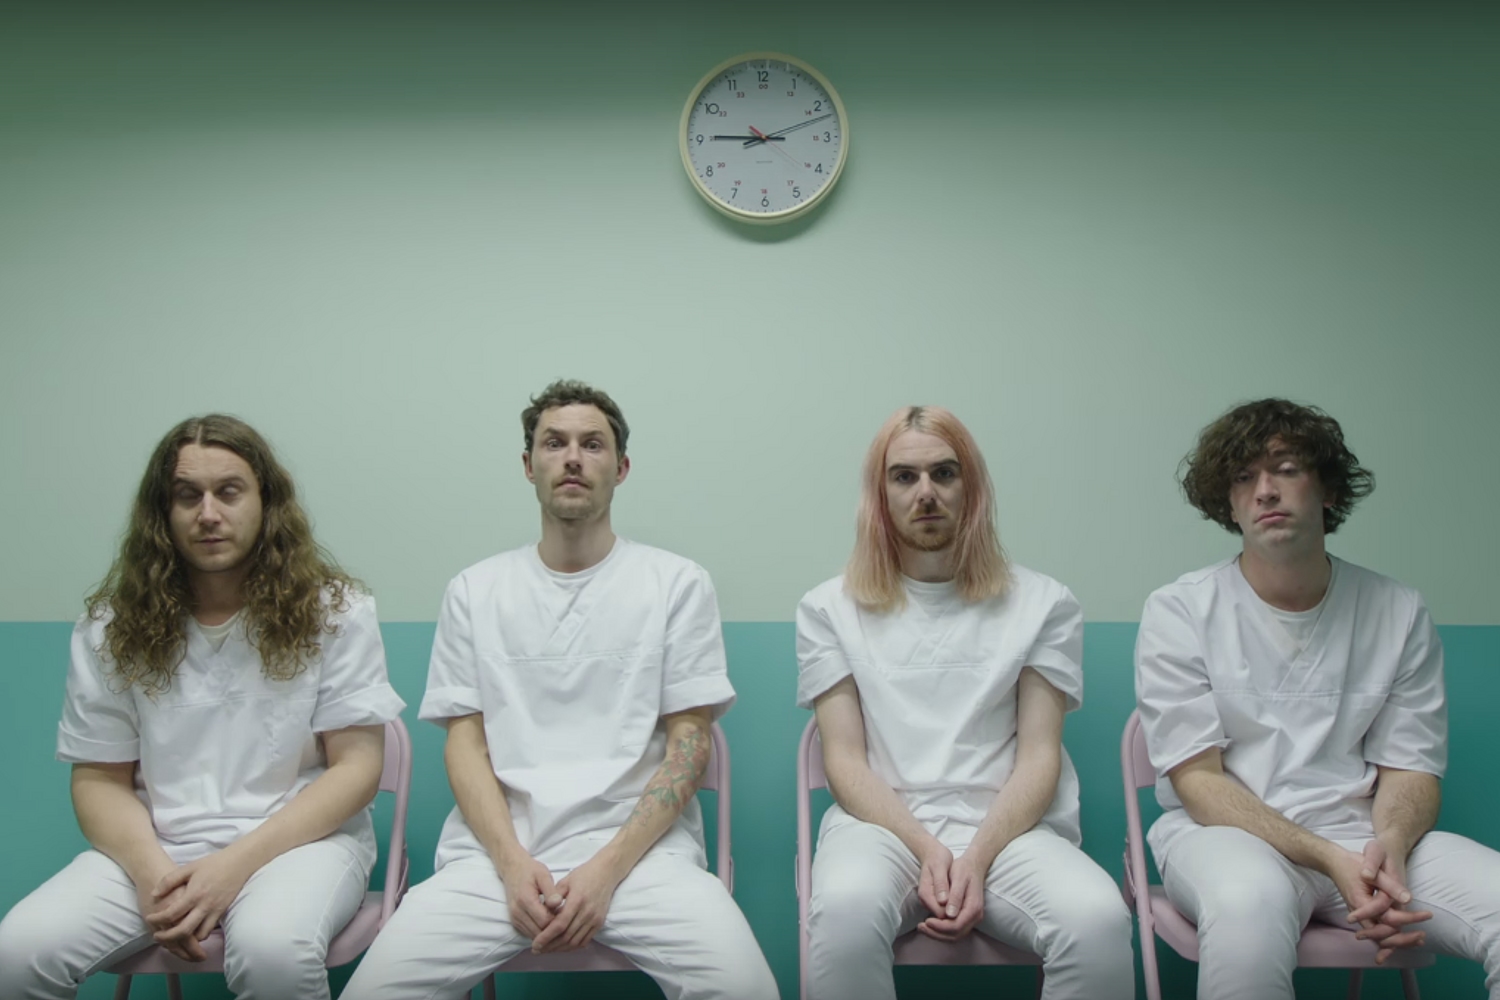 Pulled Apart By Horses battle insomnia in ‘The Big What If’ video